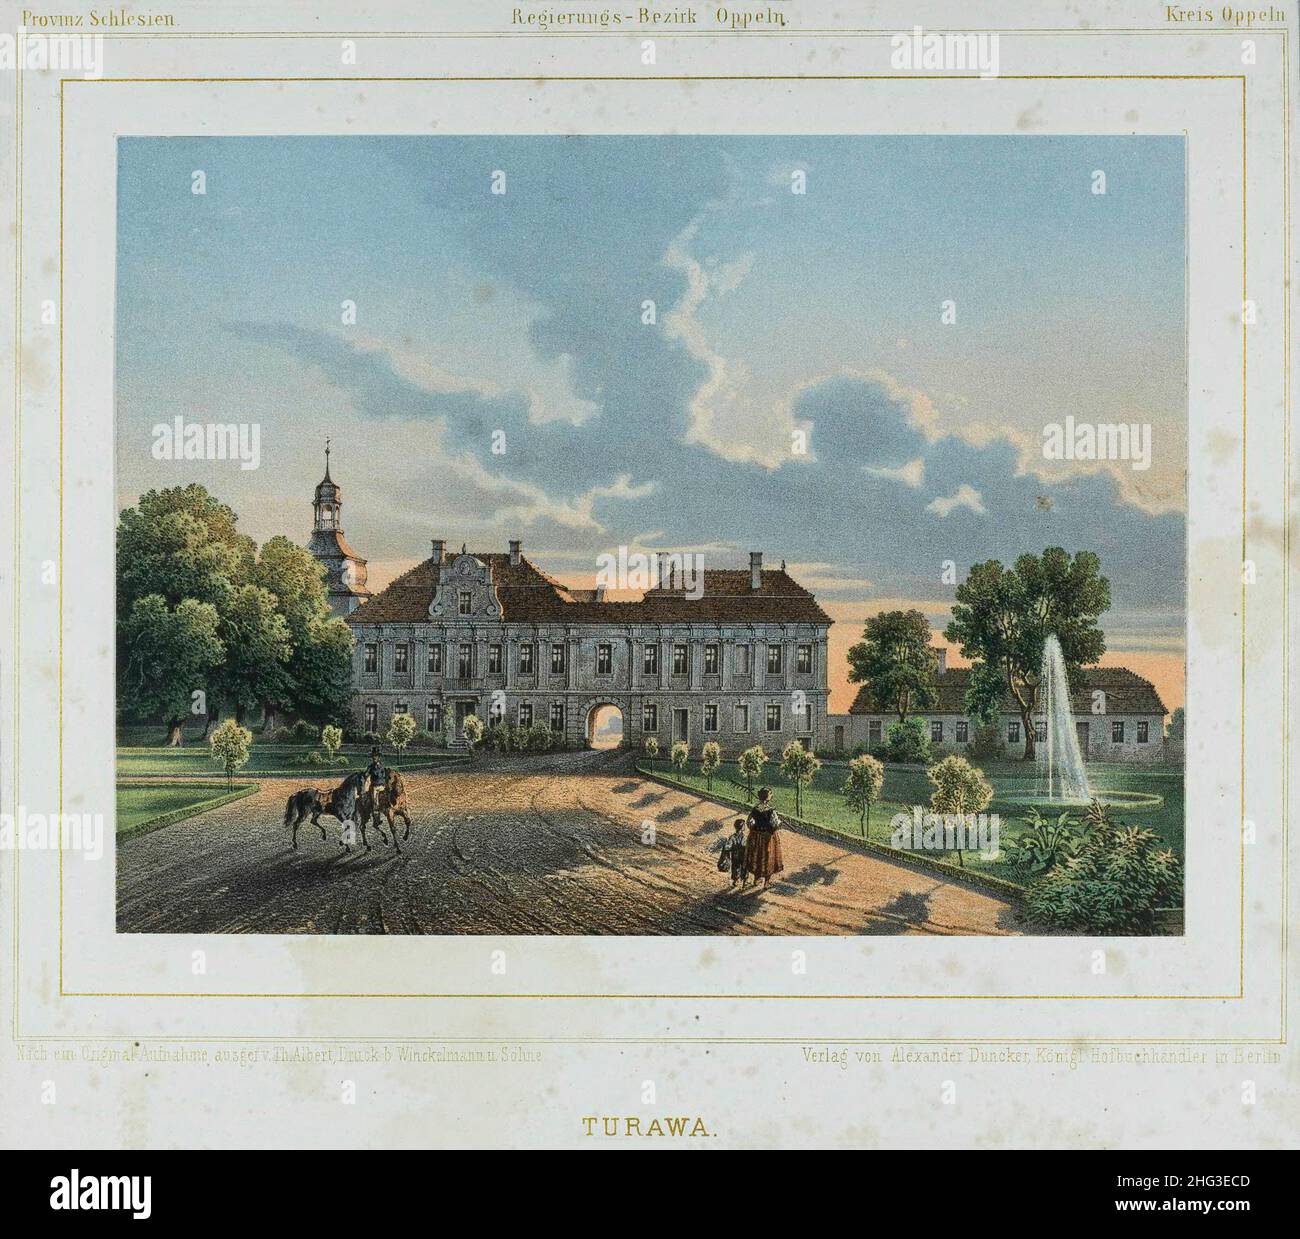 The 19th century vintage lithograph of Turawa Palace by Theodor Albert (1822-1867). Silesia, Poland (1742-1945 - Prussia, Germany) Stock Photo